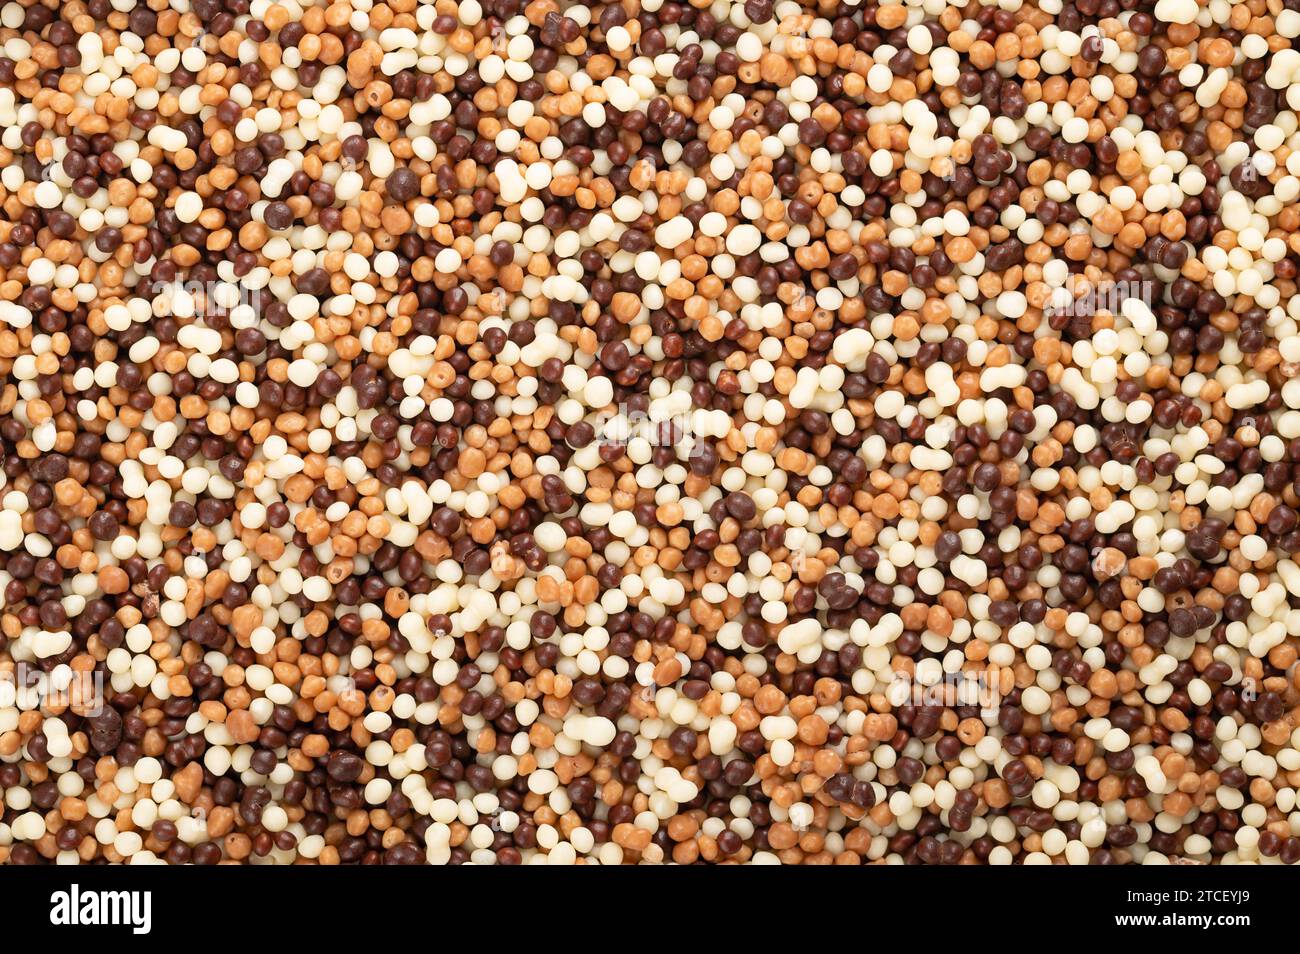 Chocolate mini pearls, background. Extra crunchy sprinkles, made of grain extrudate, covered with white, milk and dark chocolate. Used as sweet decor. Stock Photo